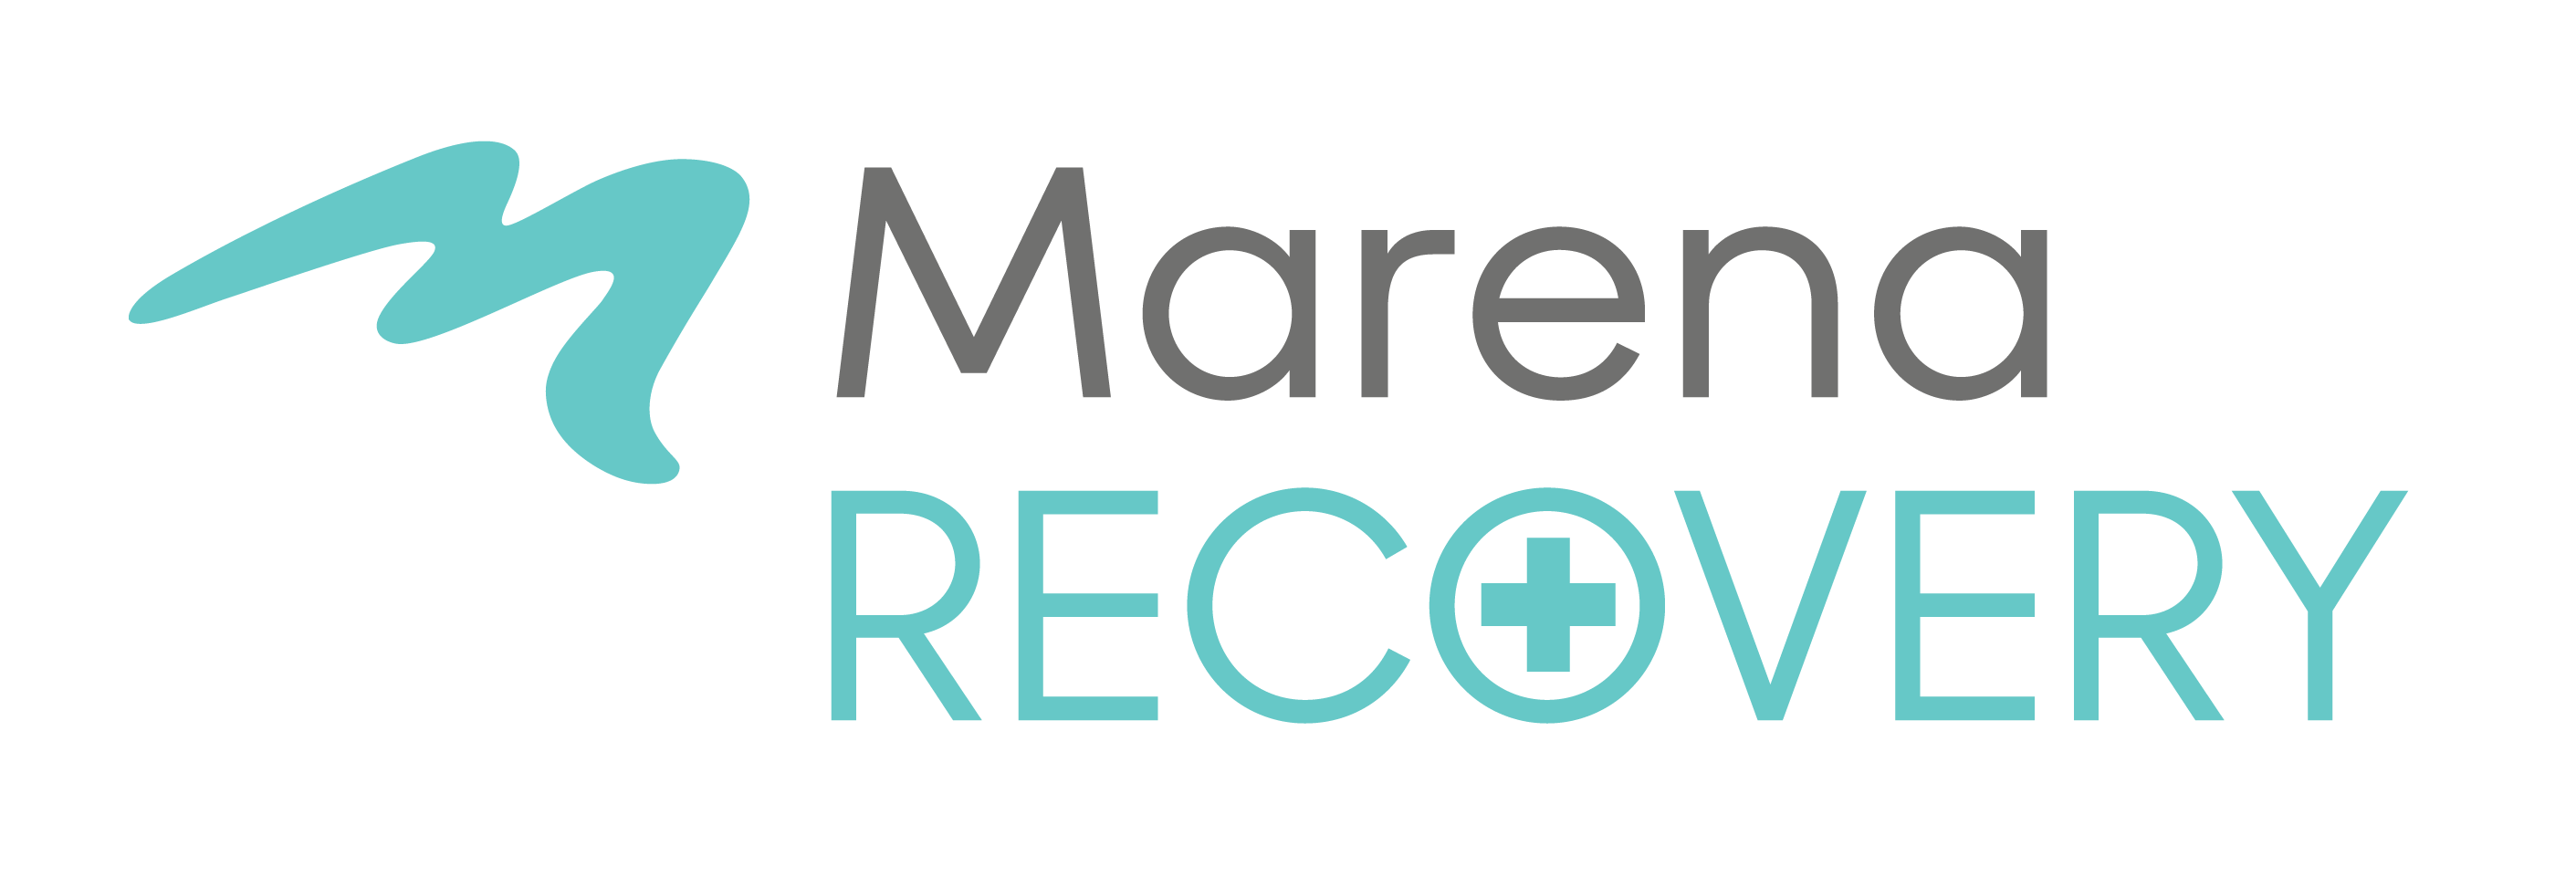 marena_recovery-lockup_primary-1.png?v=1606999766901